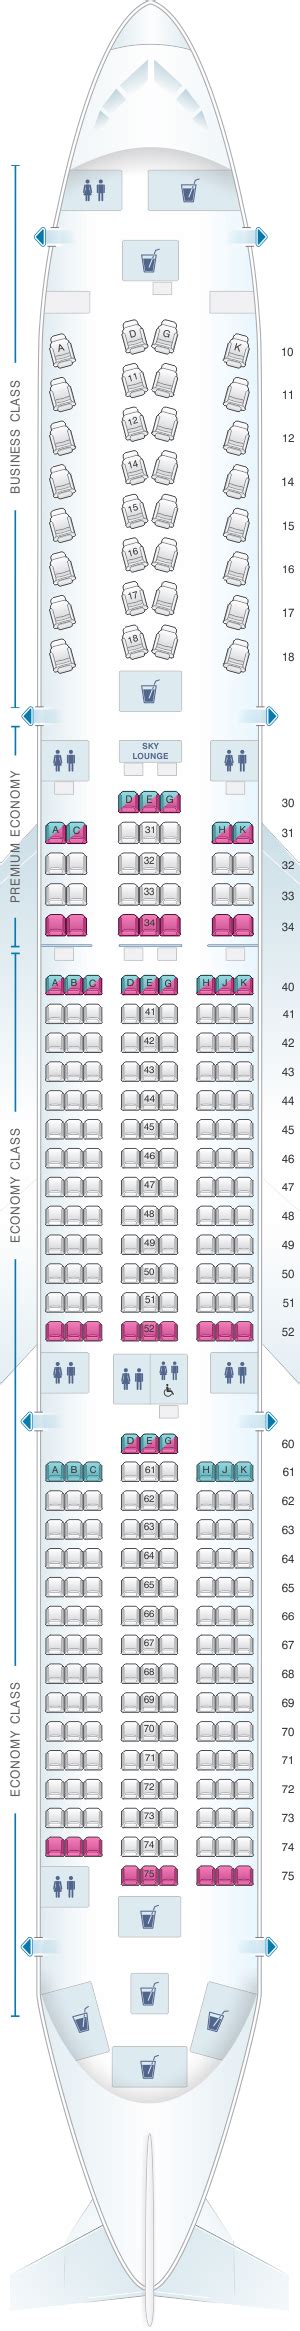 Airbus A Seat Configuration